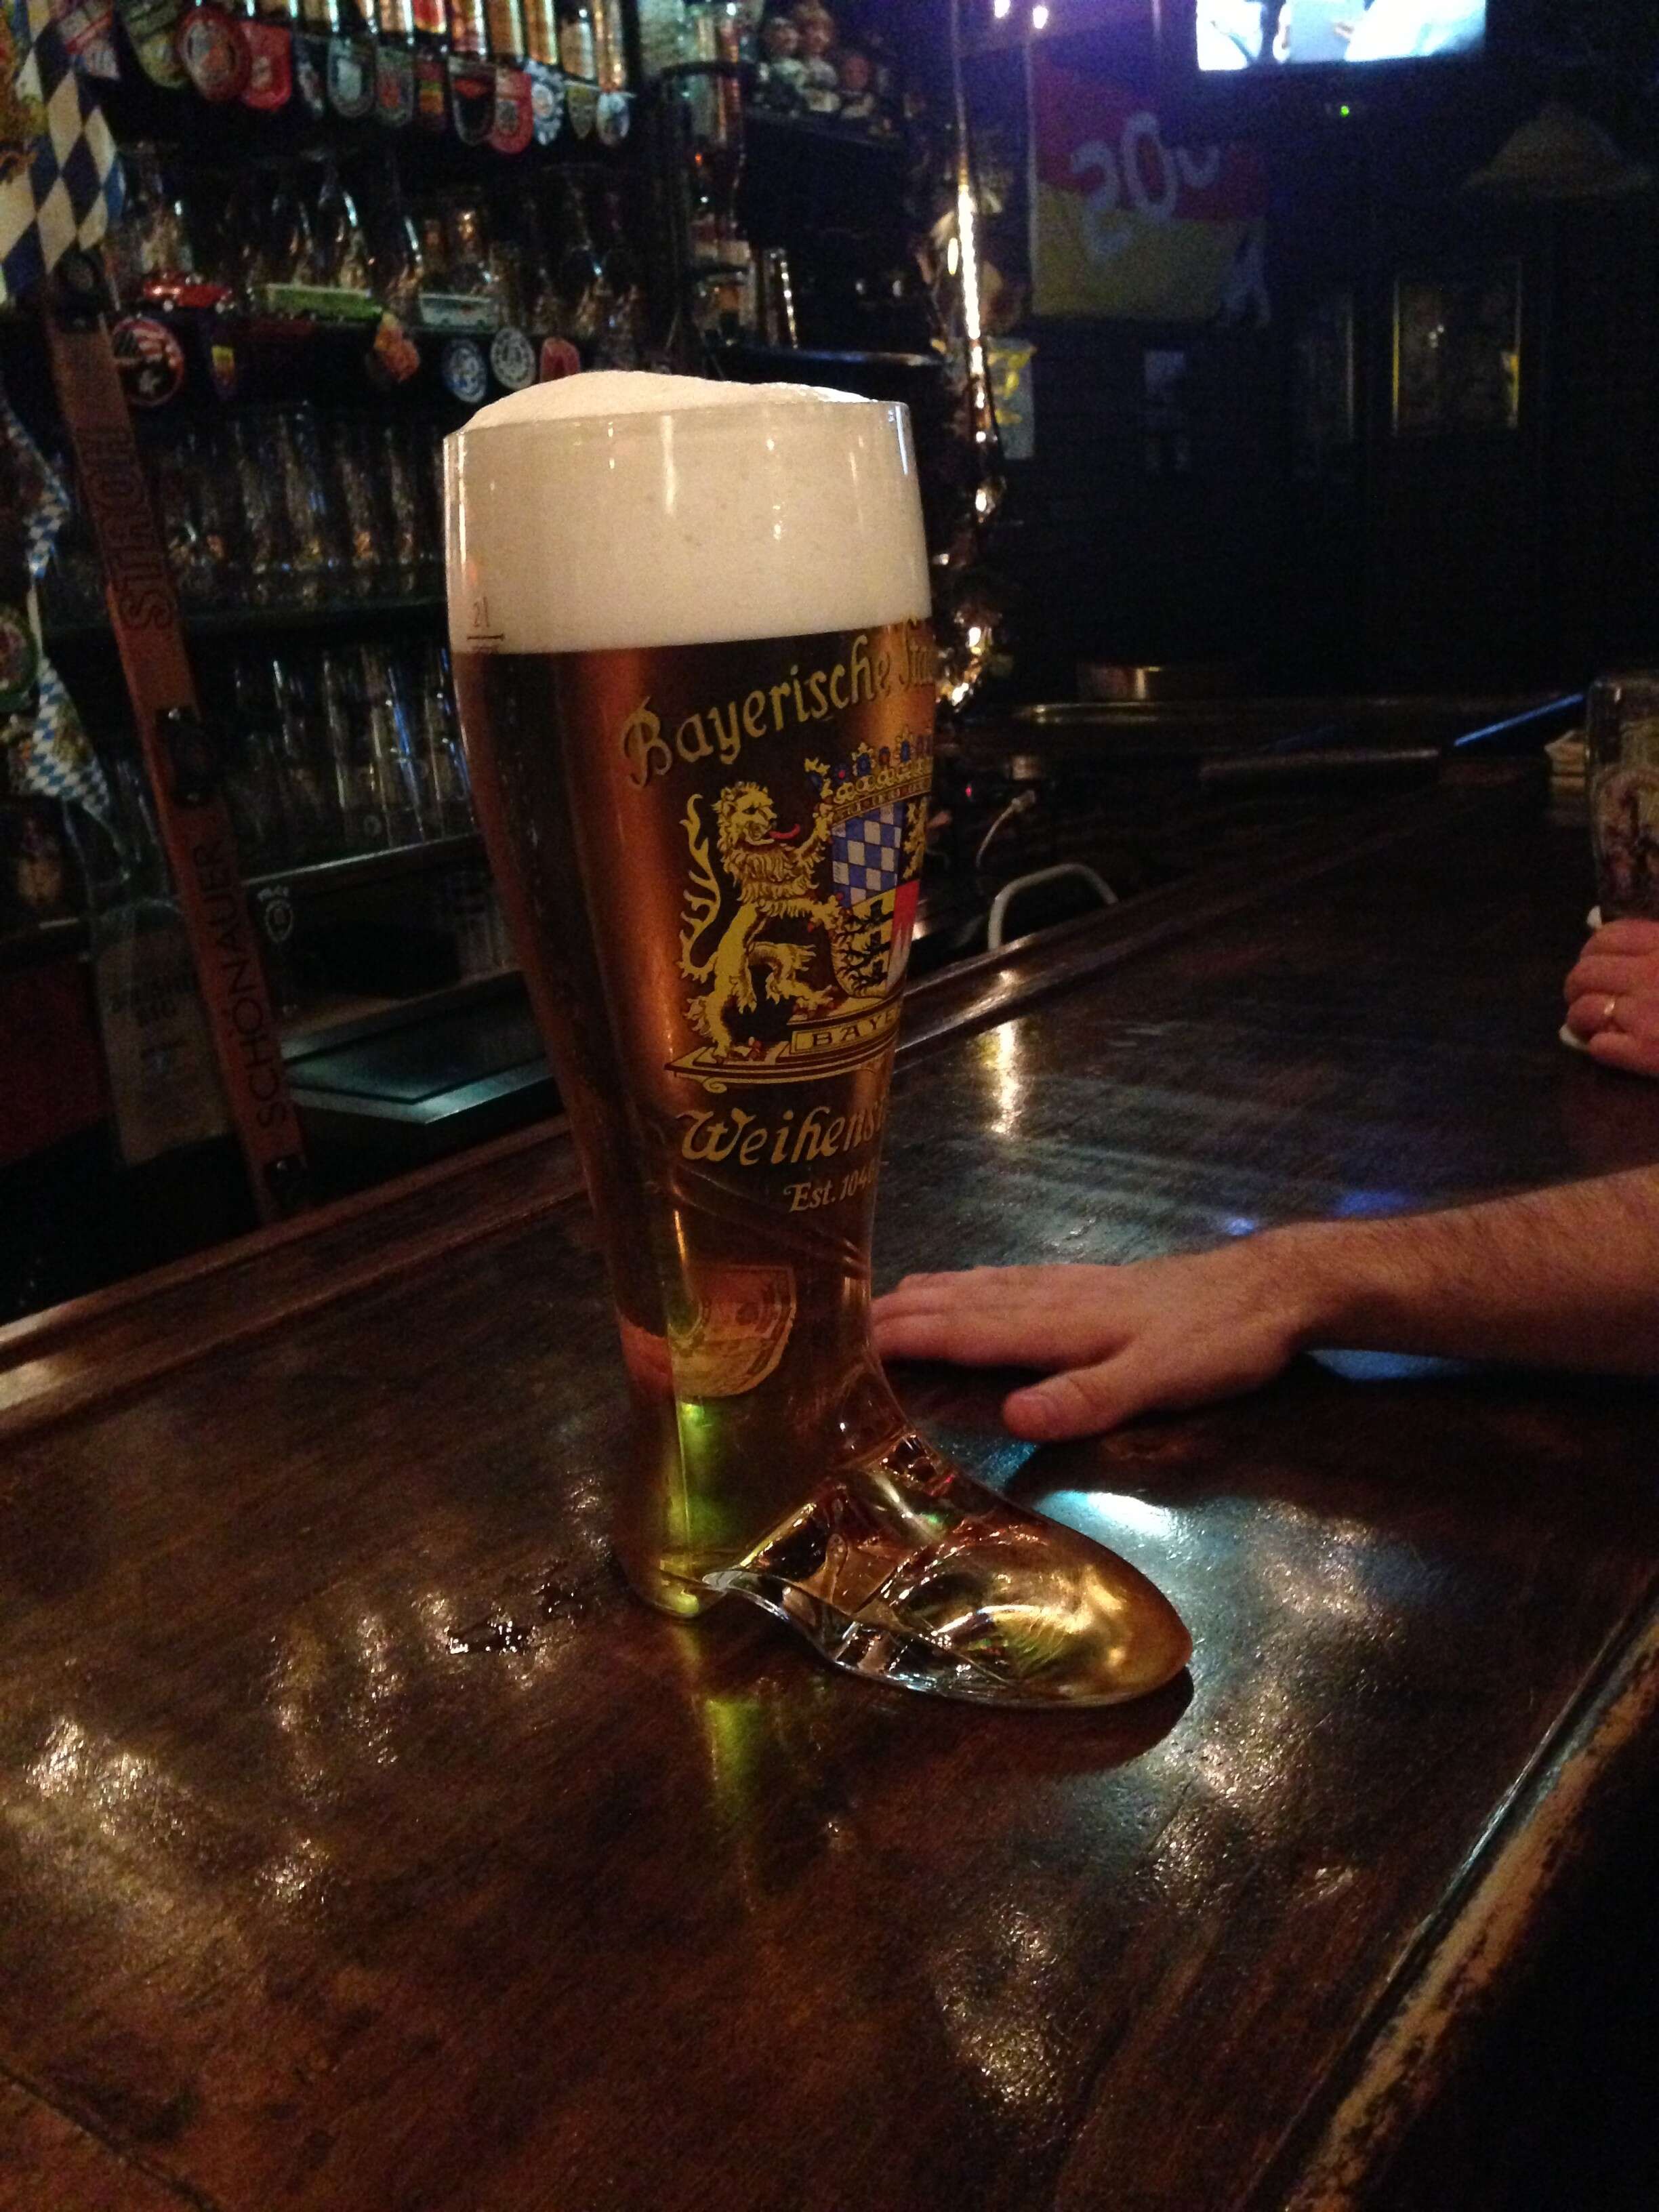 Giant beers - das boot - NYC